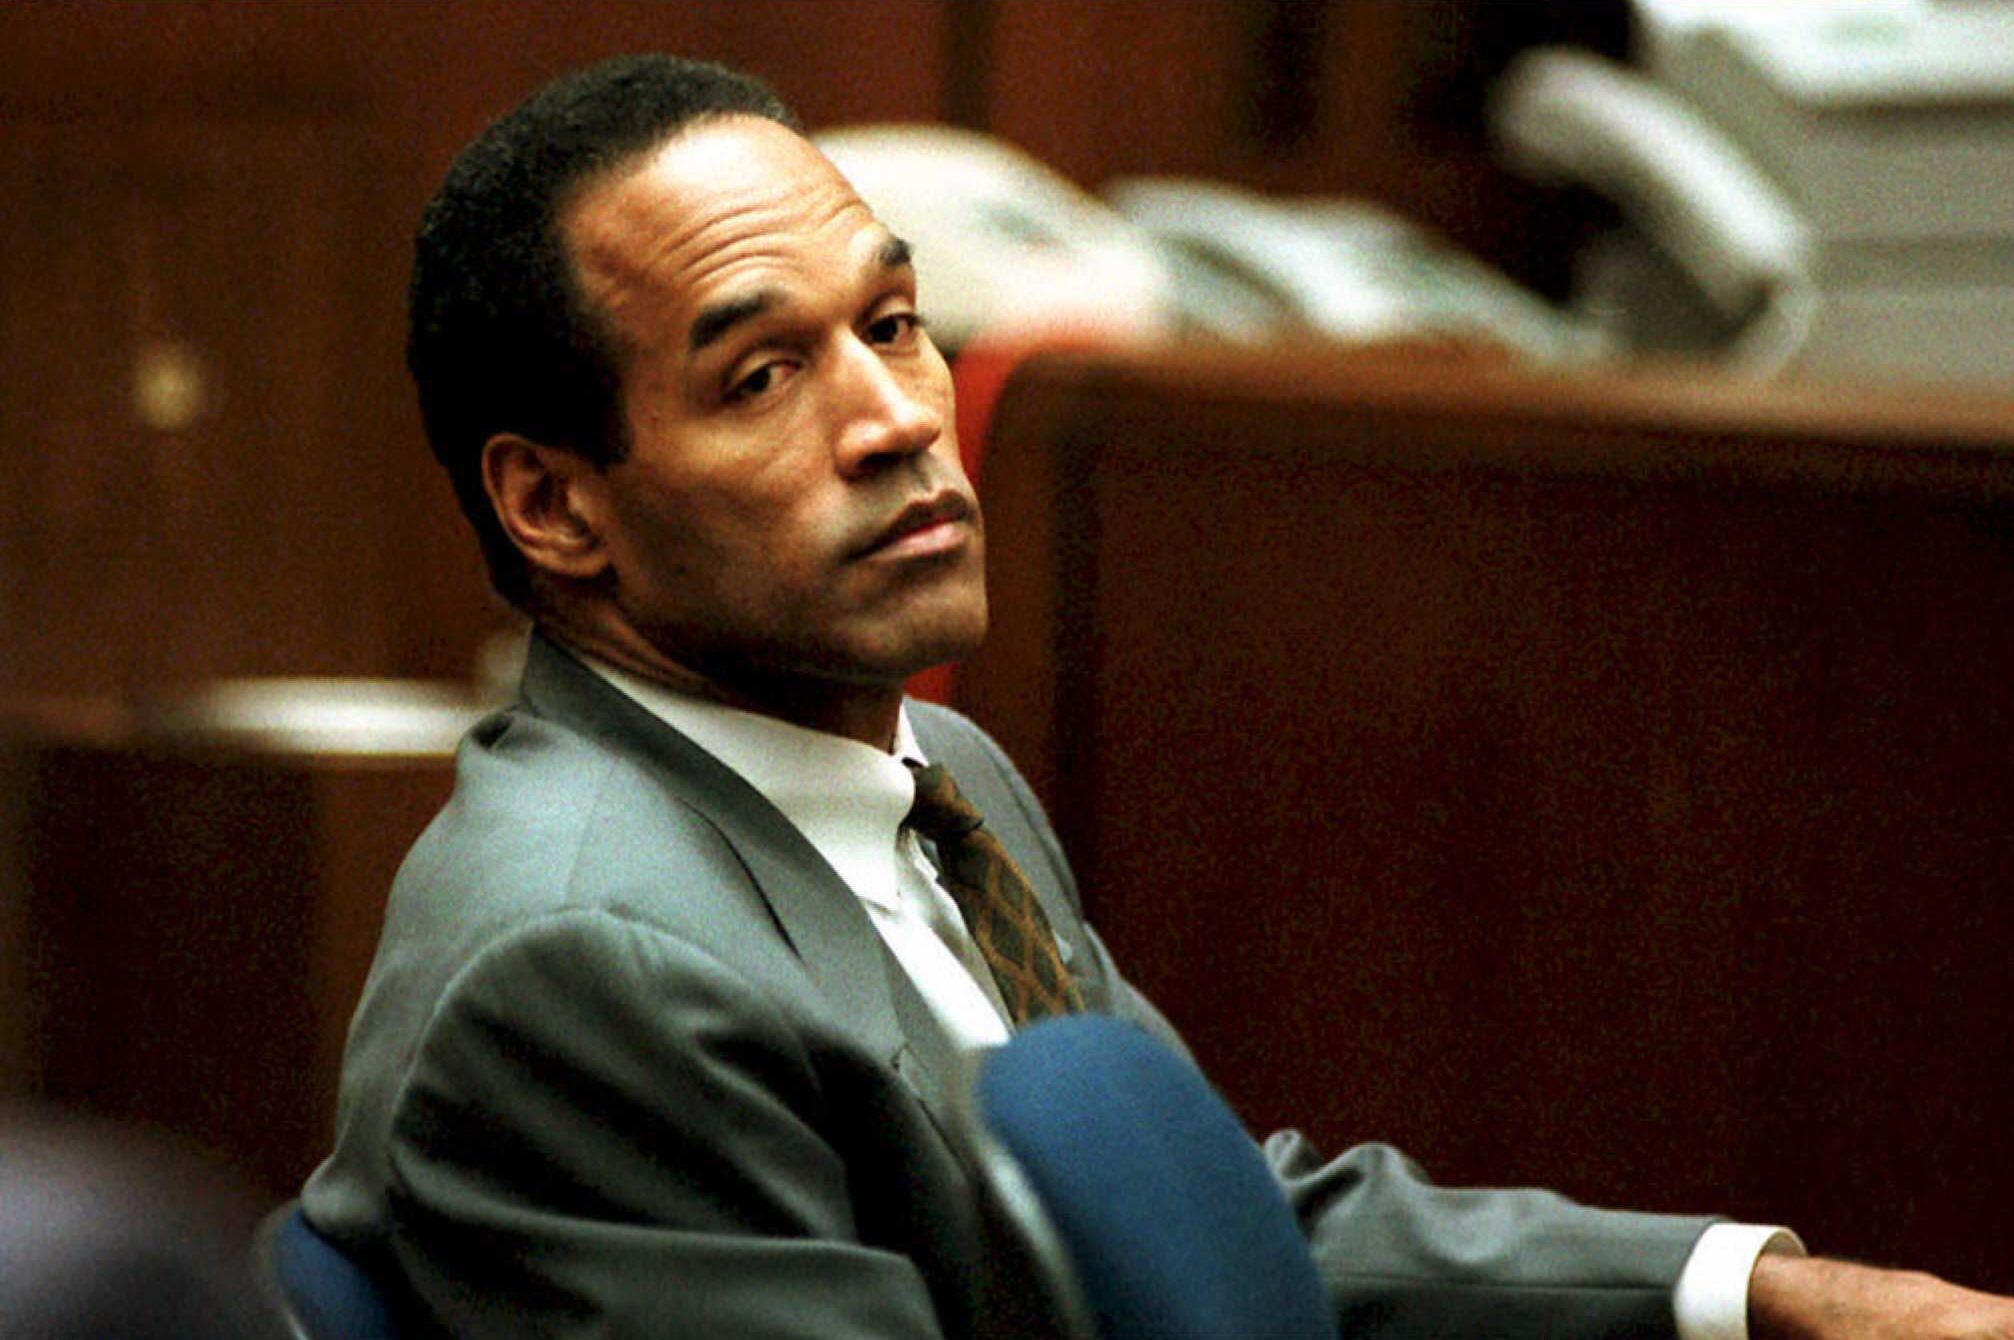 O.J. Simpson in court